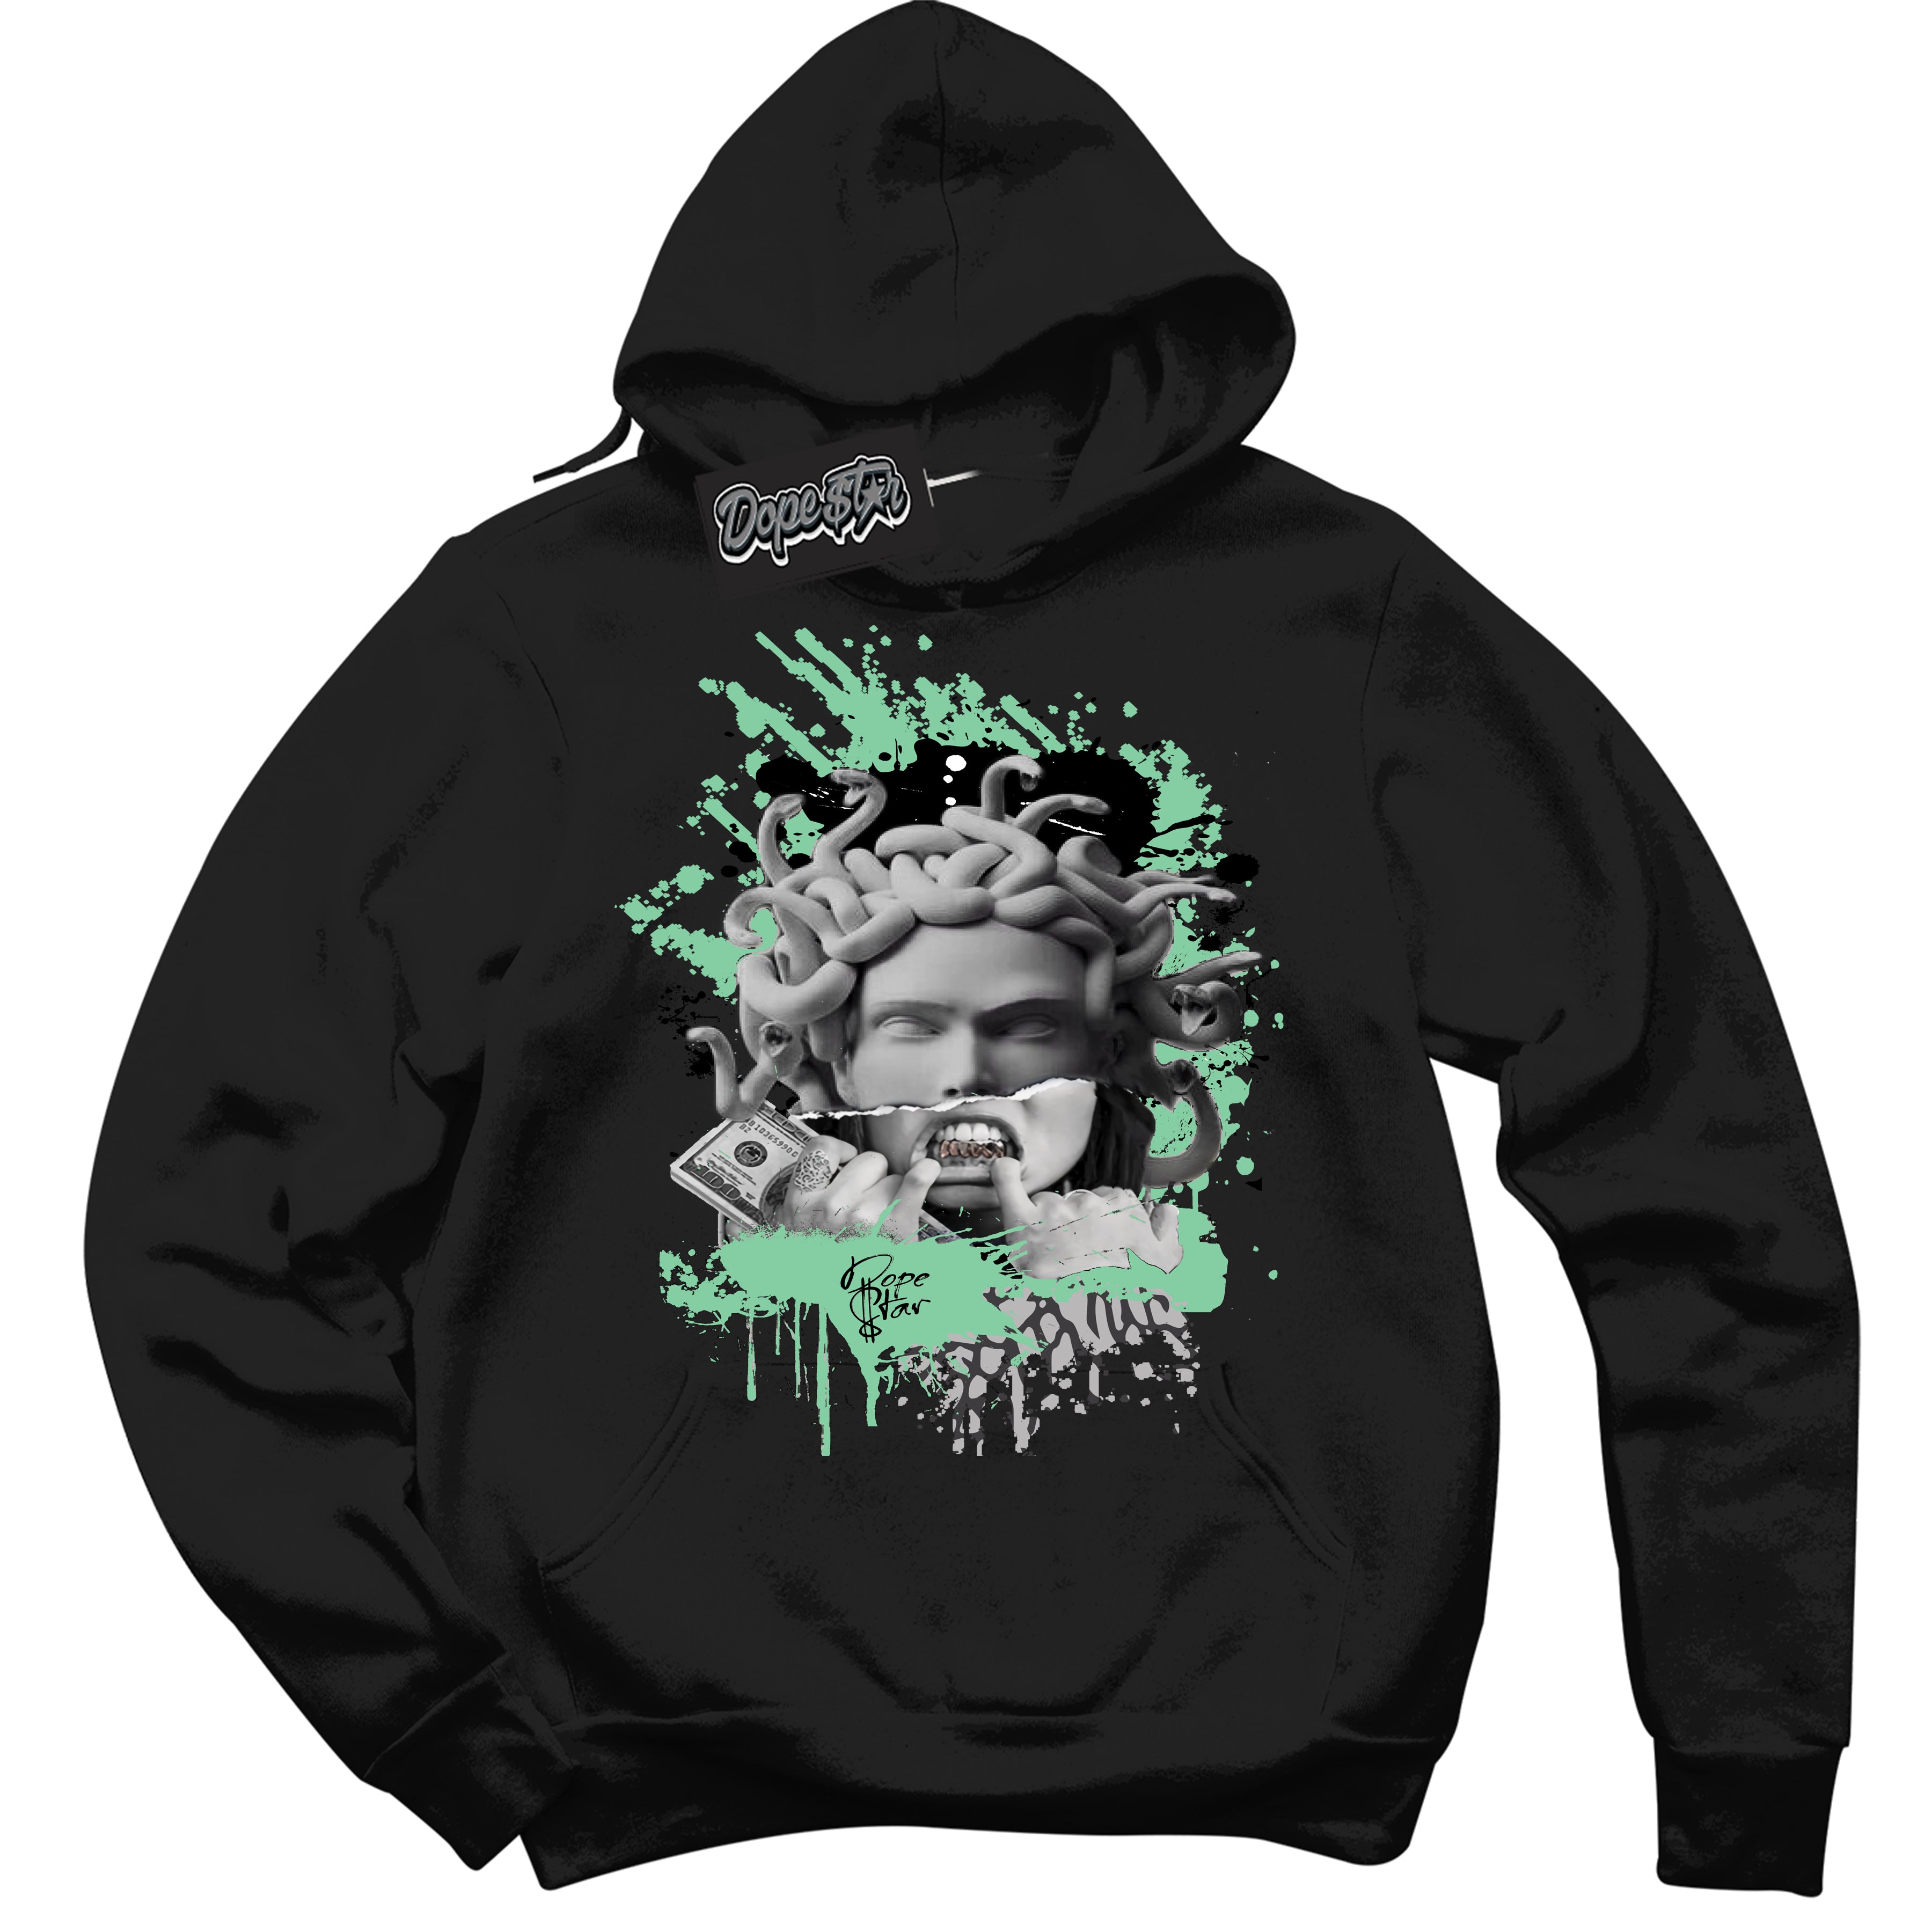 Cool Black Graphic DopeStar Hoodie with “ Medusa “ print, that perfectly matches Green Glow 3S sneakers